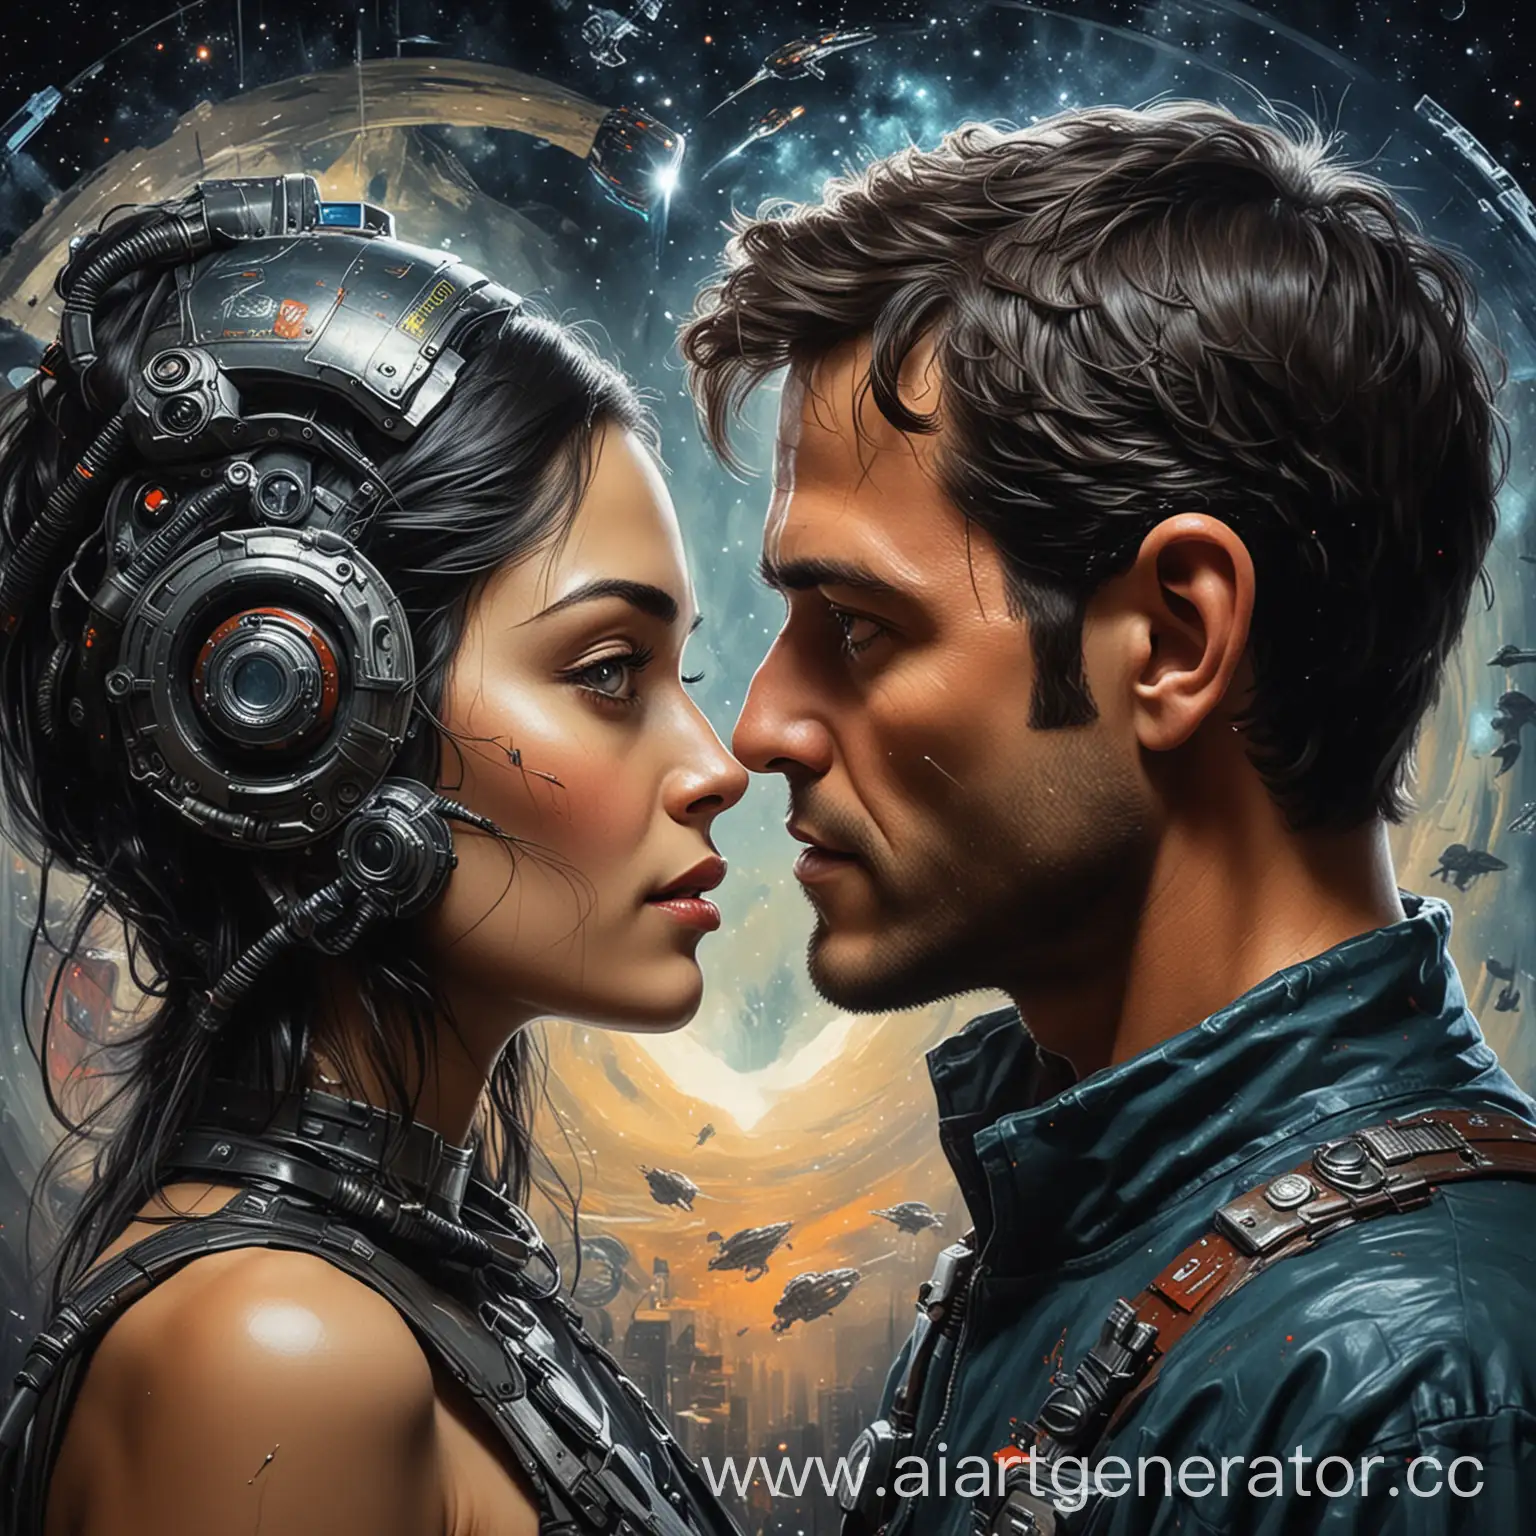 SciFi-Film-Characters-Expressing-Love-in-Vibrant-Painting